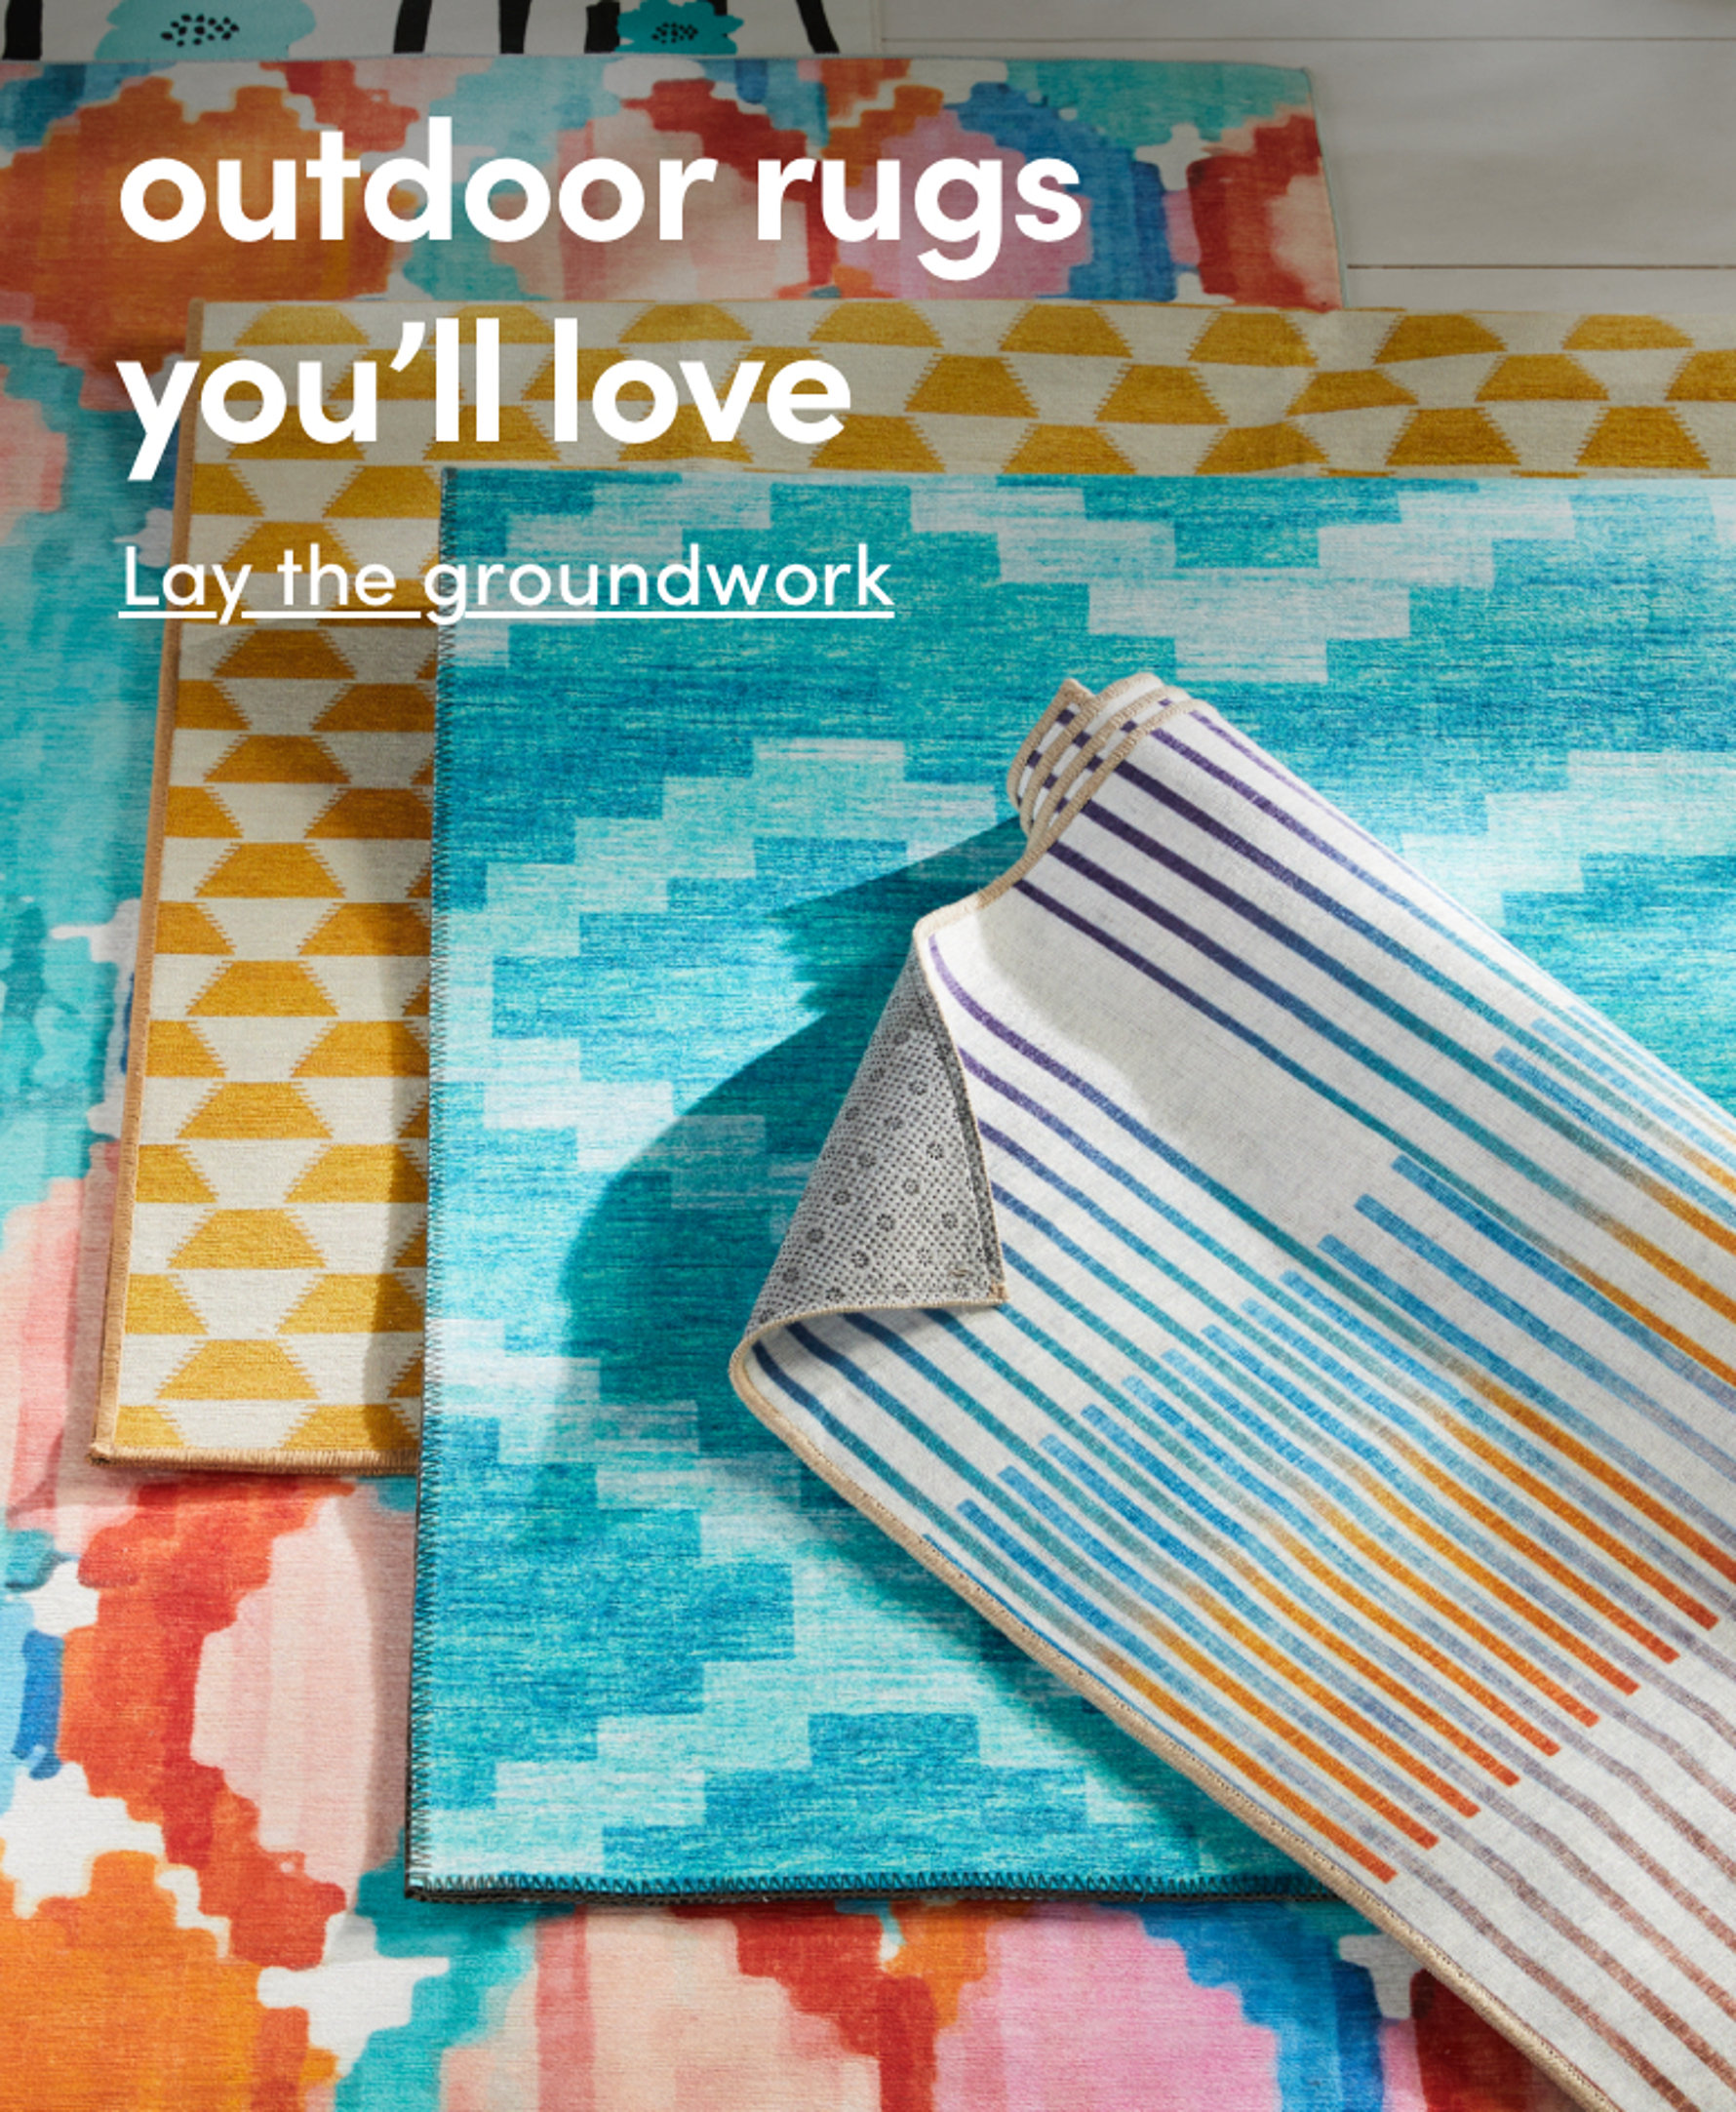 outdoor rugs you'll love. Lay the groundwork